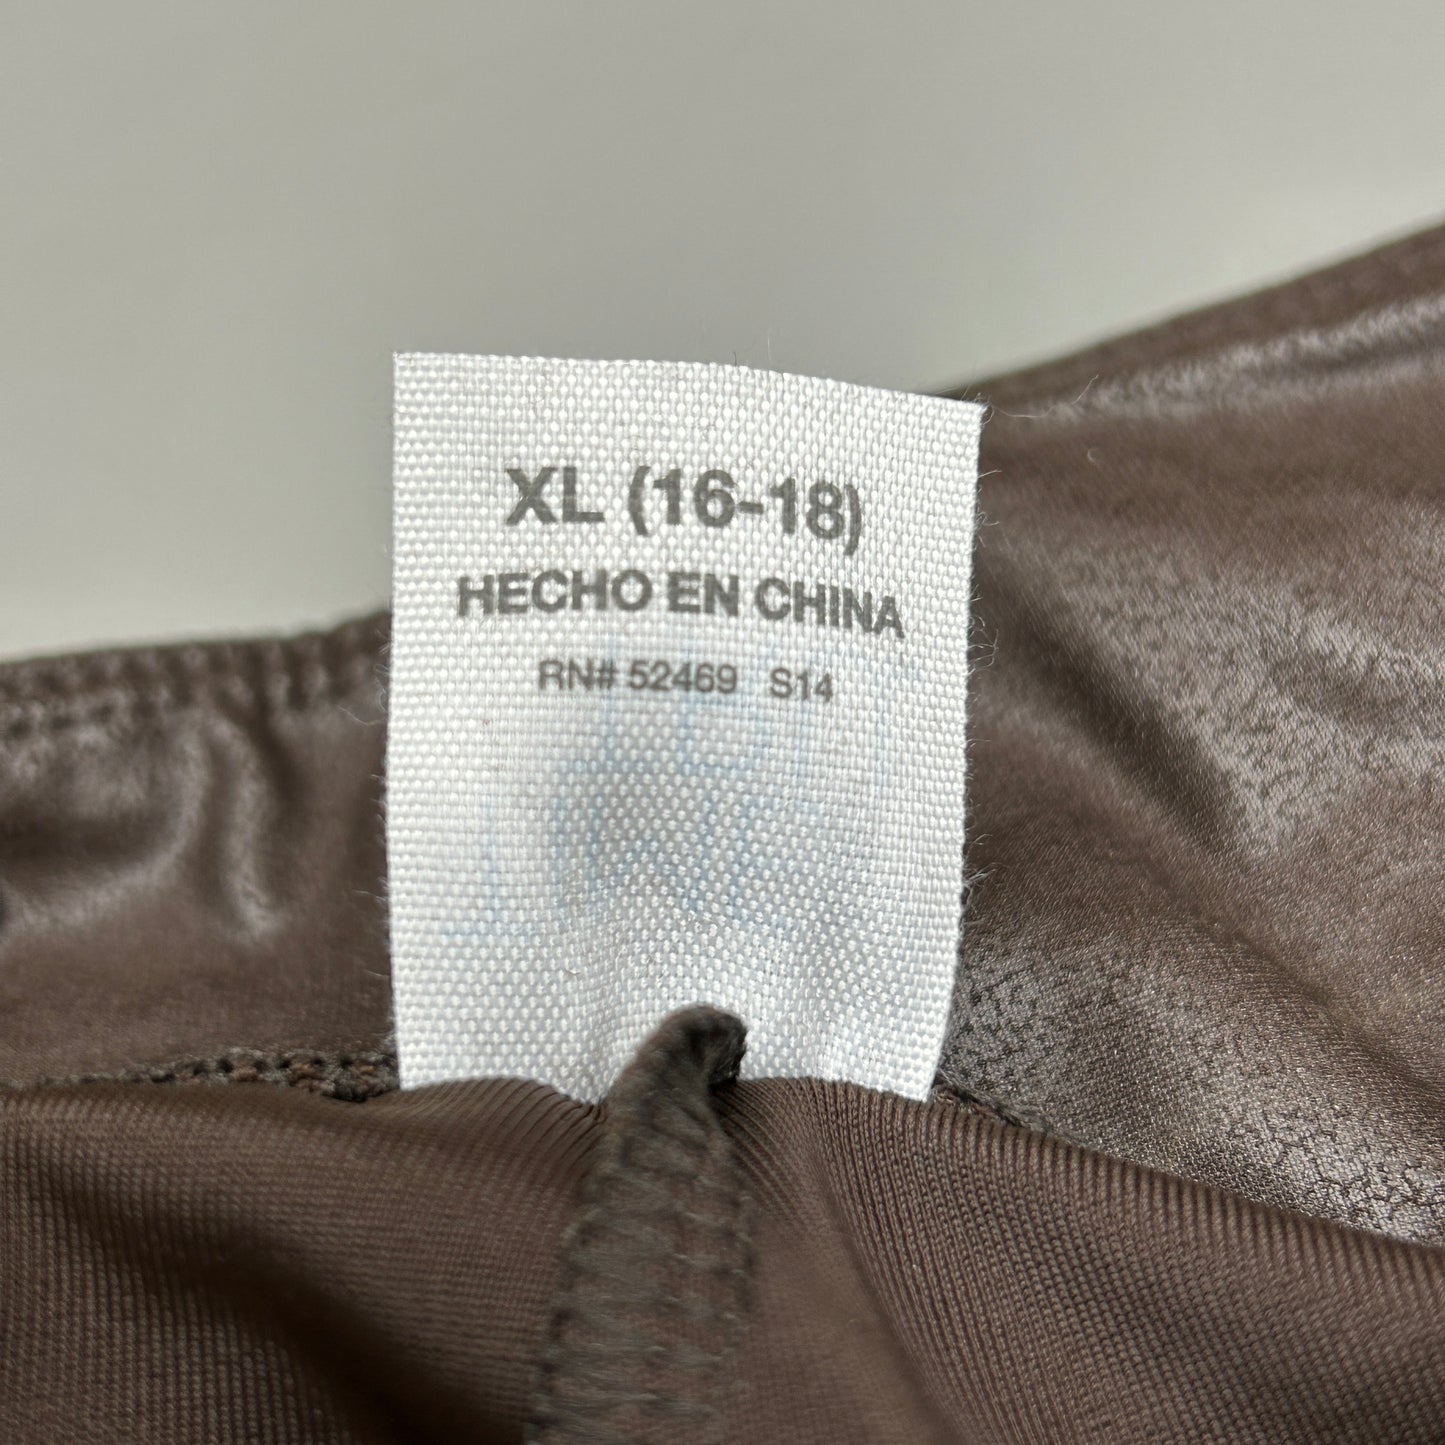 TIME AND TRU Women's Faux Leather Leggings Sz XL 16-18 Brown (New)